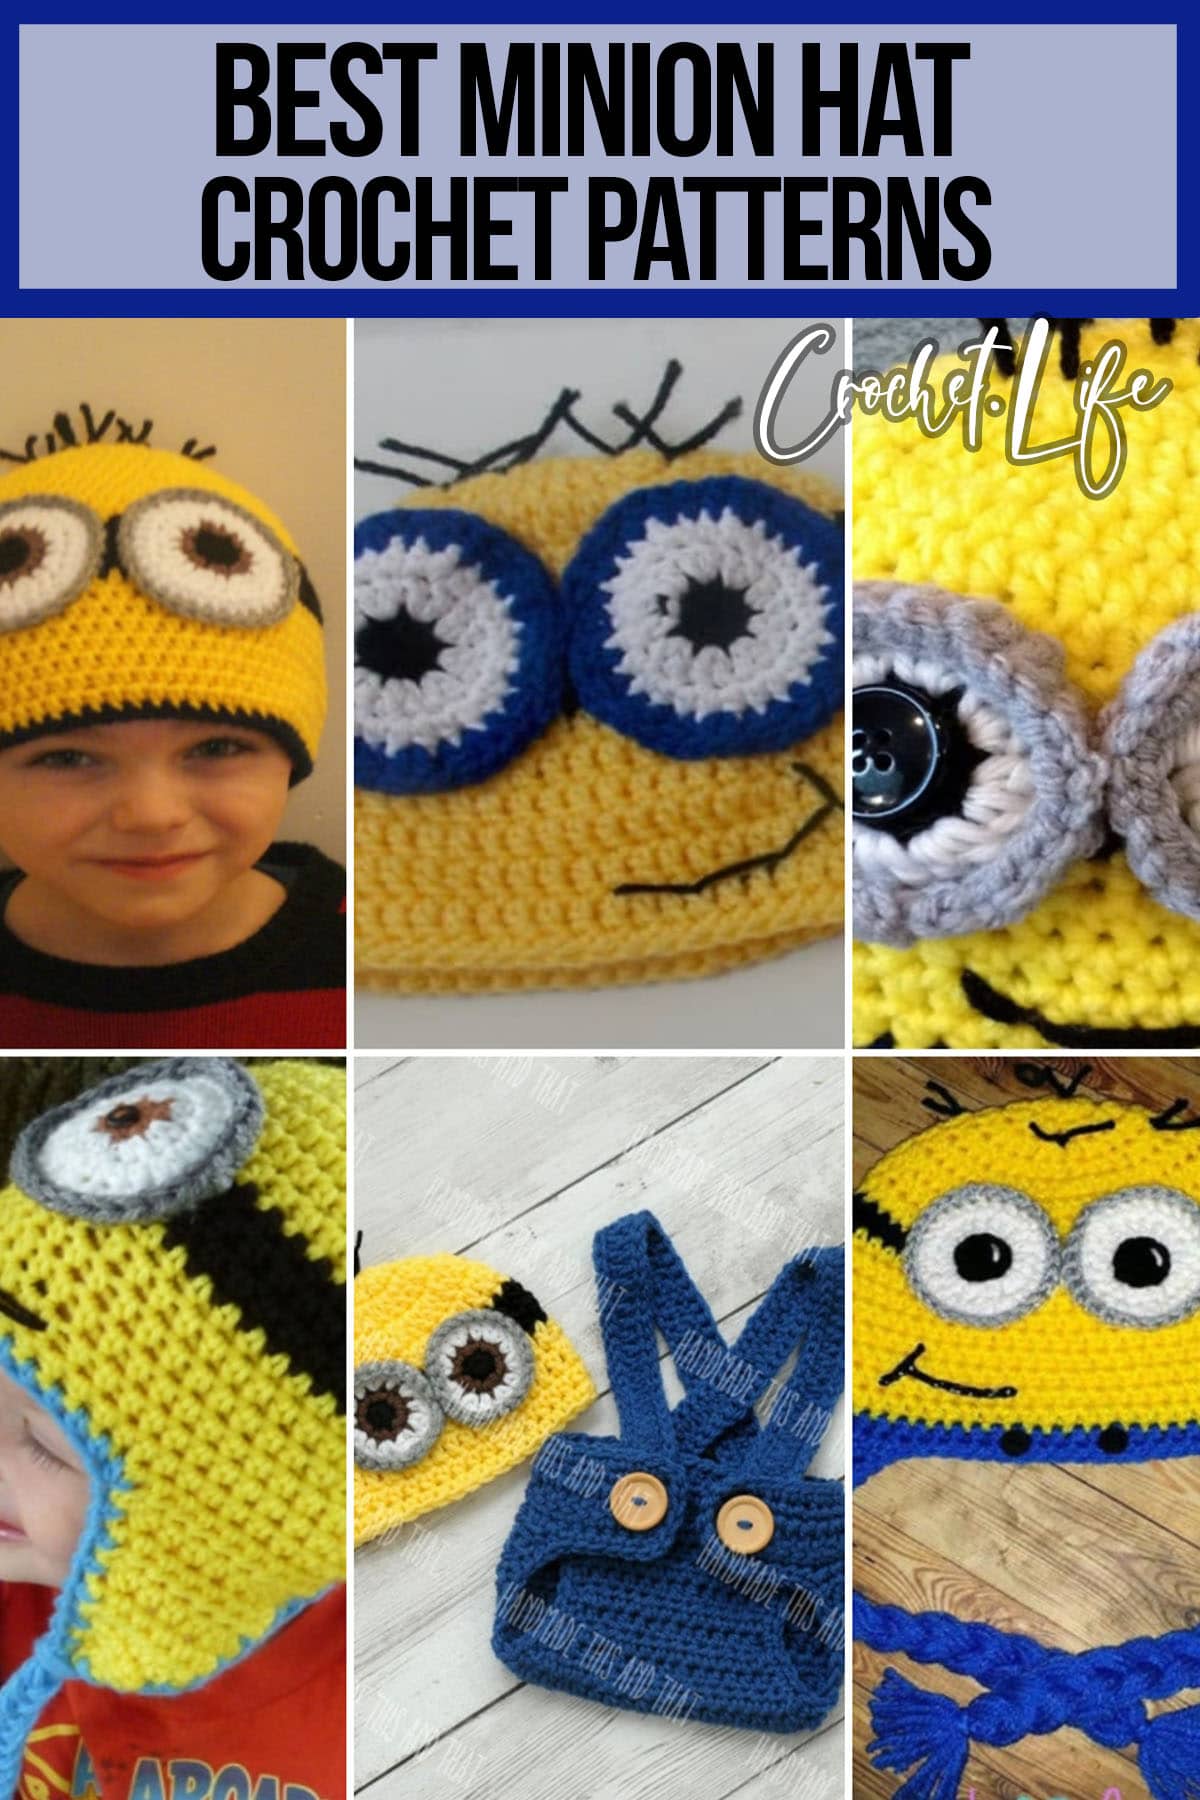 photo collage of minion crochet patterns with text which reads best minion hat crochet patterns